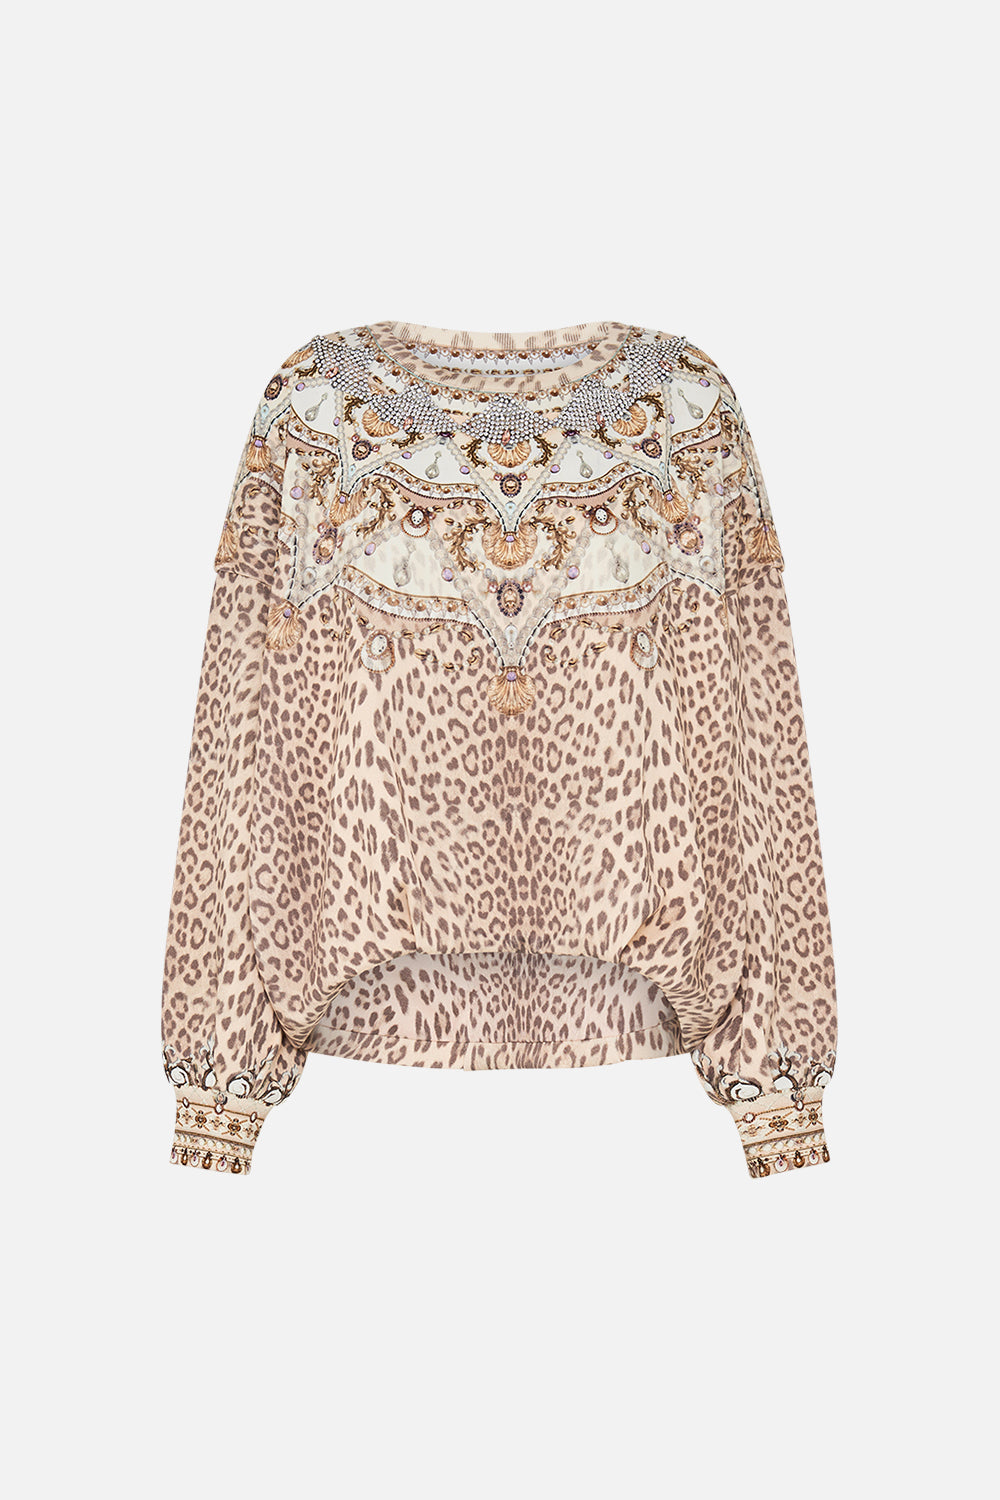 CAMILLA embellished sweater in Grotto Goddess print